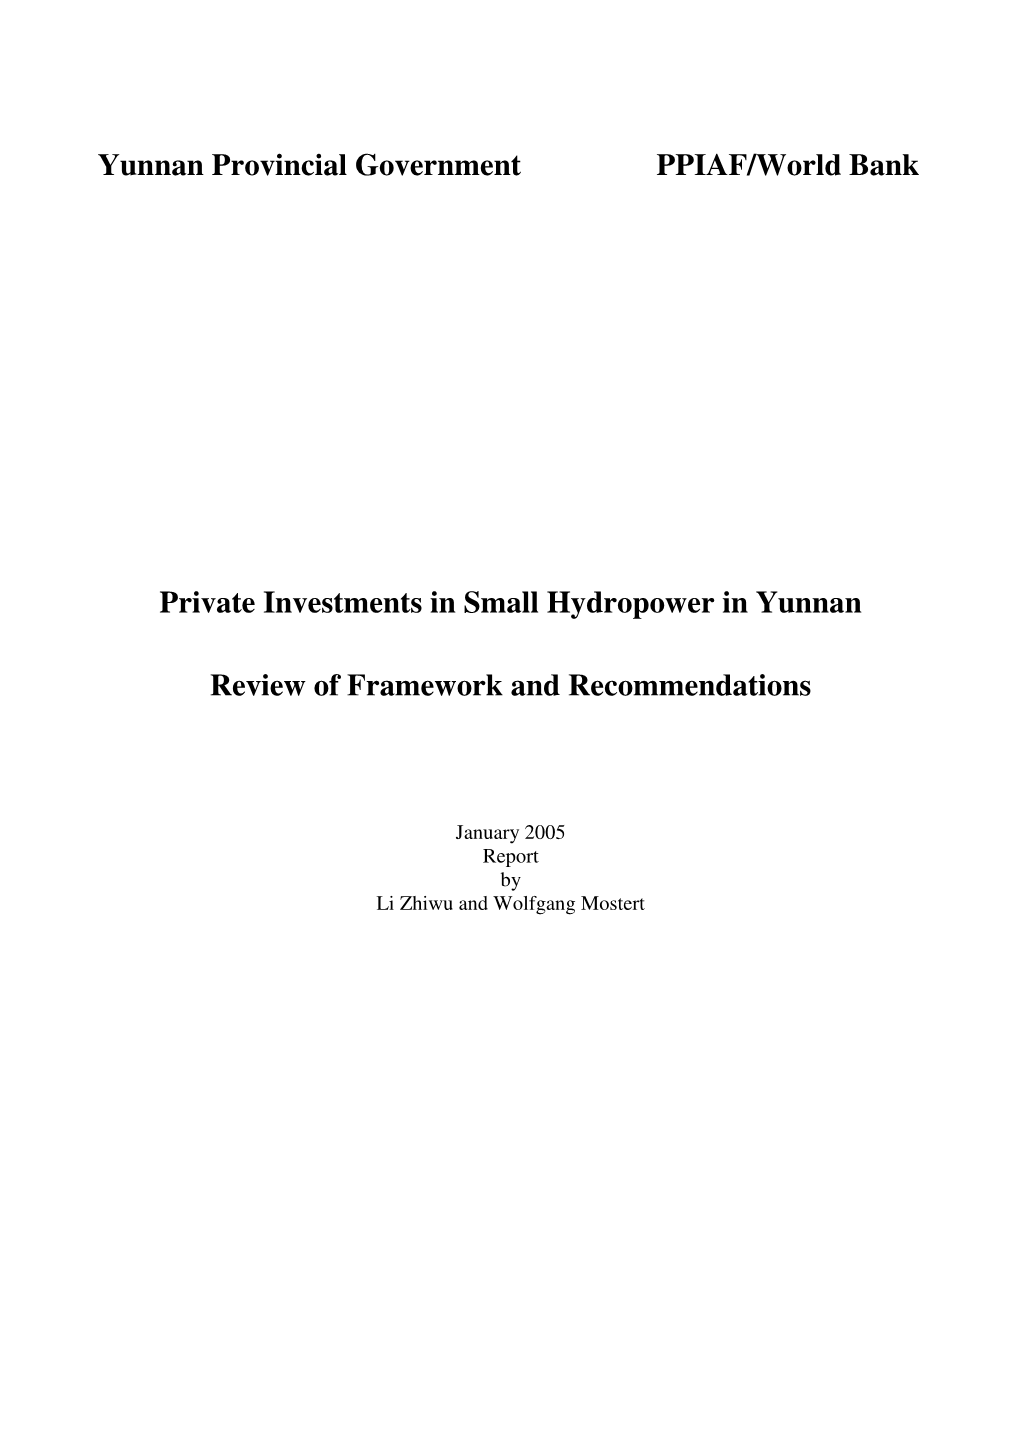 Yunnan Provincial Government PPIAF/World Bank Private Investments in Small Hydropower in Yunnan Review of Framework and Recomme